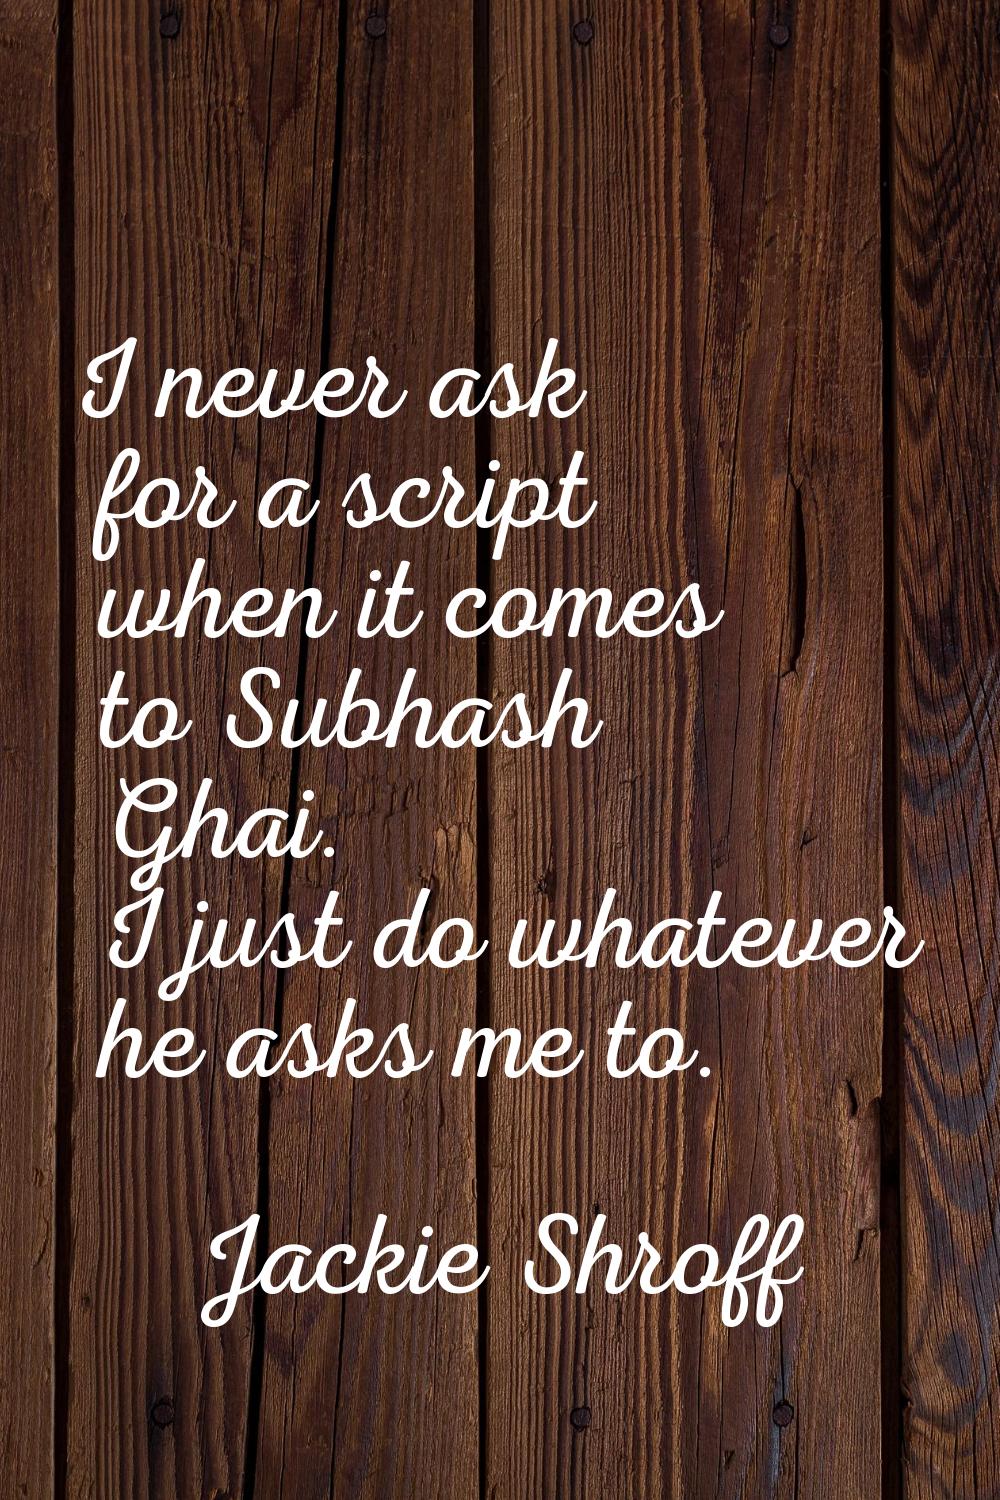 I never ask for a script when it comes to Subhash Ghai. I just do whatever he asks me to.